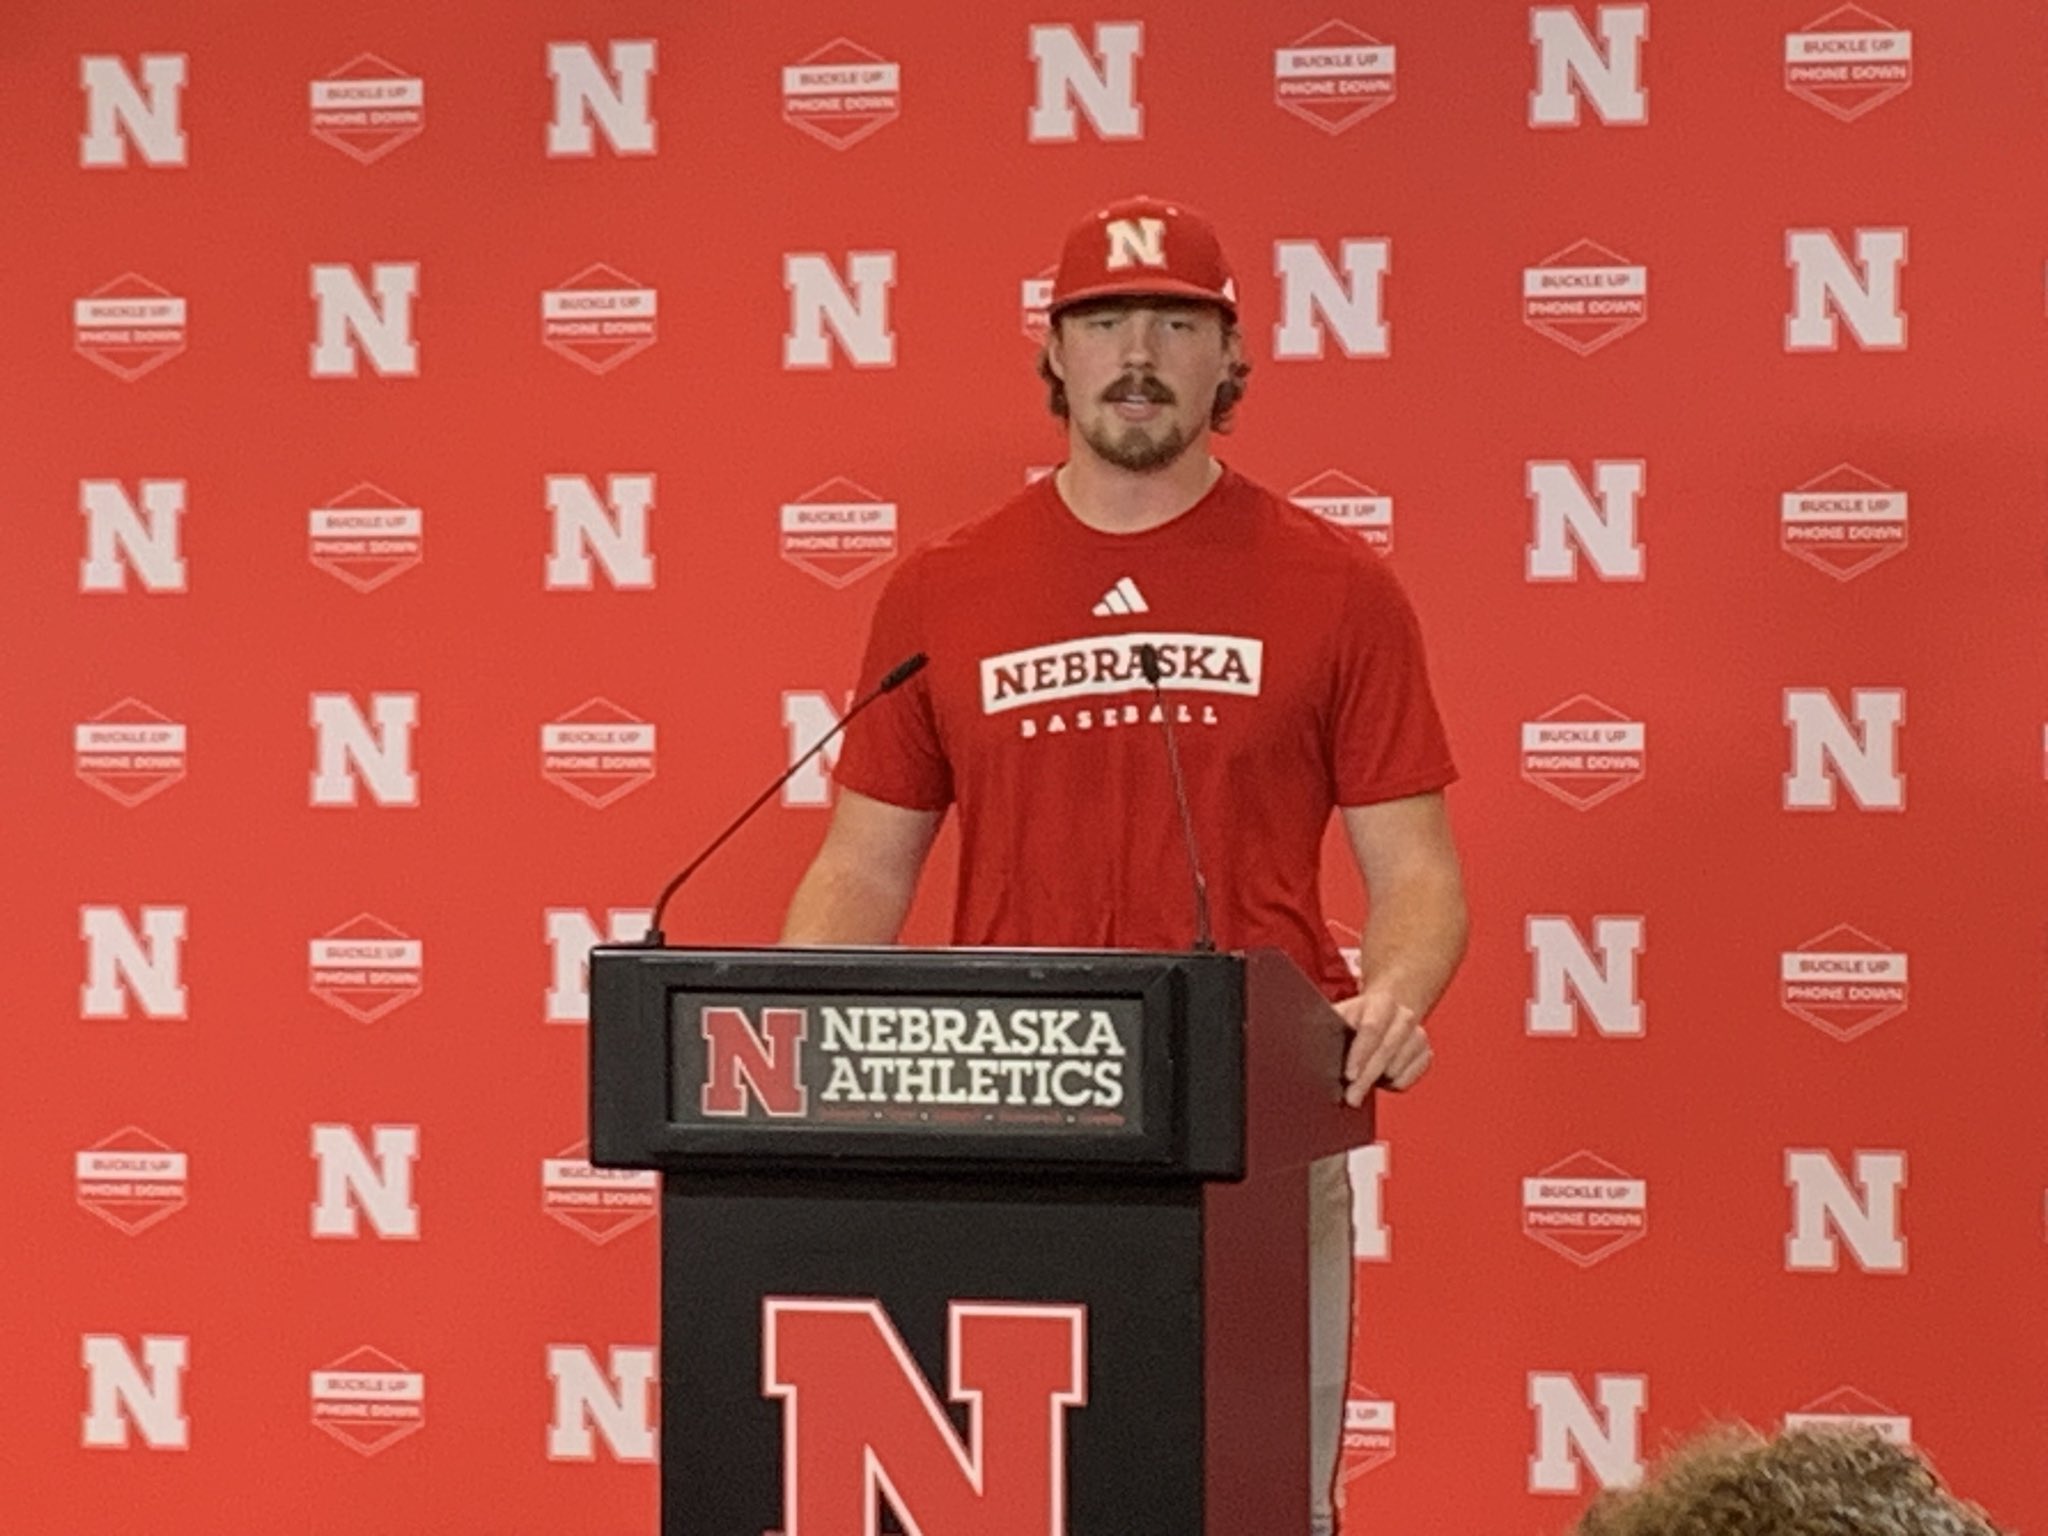 Adam Krueger on X: ⚾️ #Huskers pitcher Drew Christo says he doesn't feel  like he's in his 3rd year at Nebraska. Says he added a harder slider/cutter  & it's his go-to now.